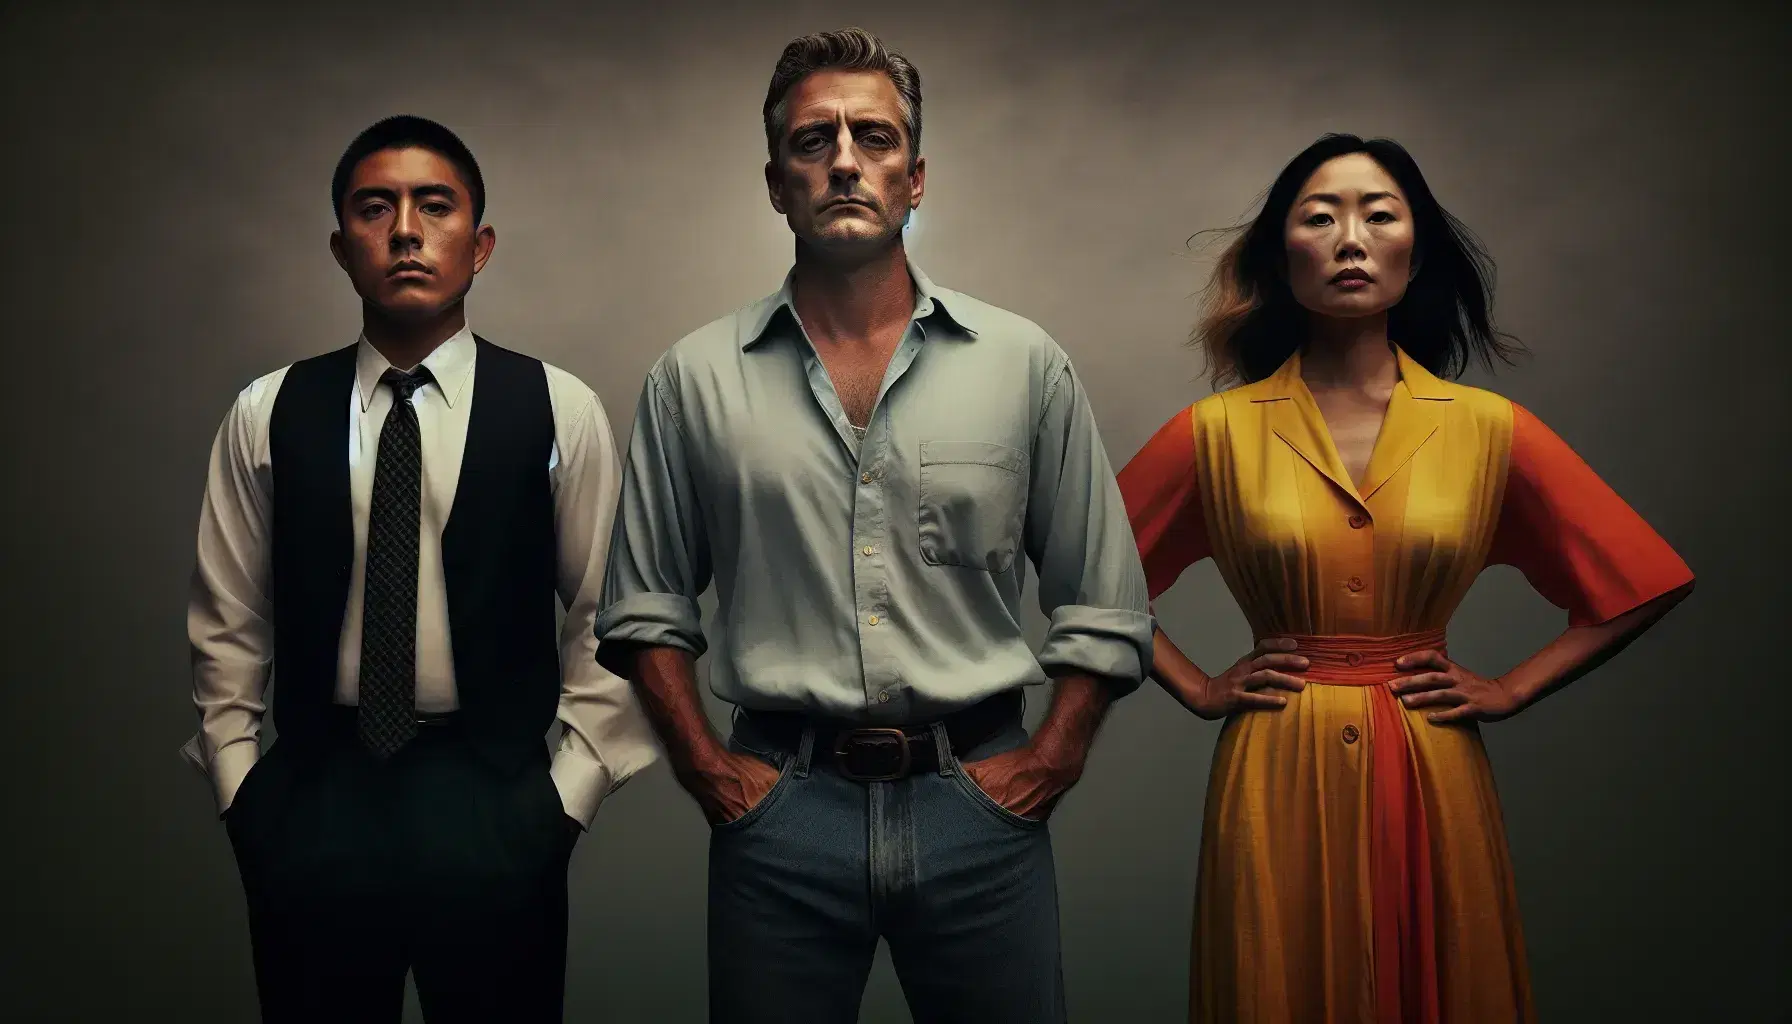 Three diverse individuals embodying societal roles: a professional Hispanic person, a stern middle-aged Caucasian man, and an empowered Asian woman, against a plain backdrop.